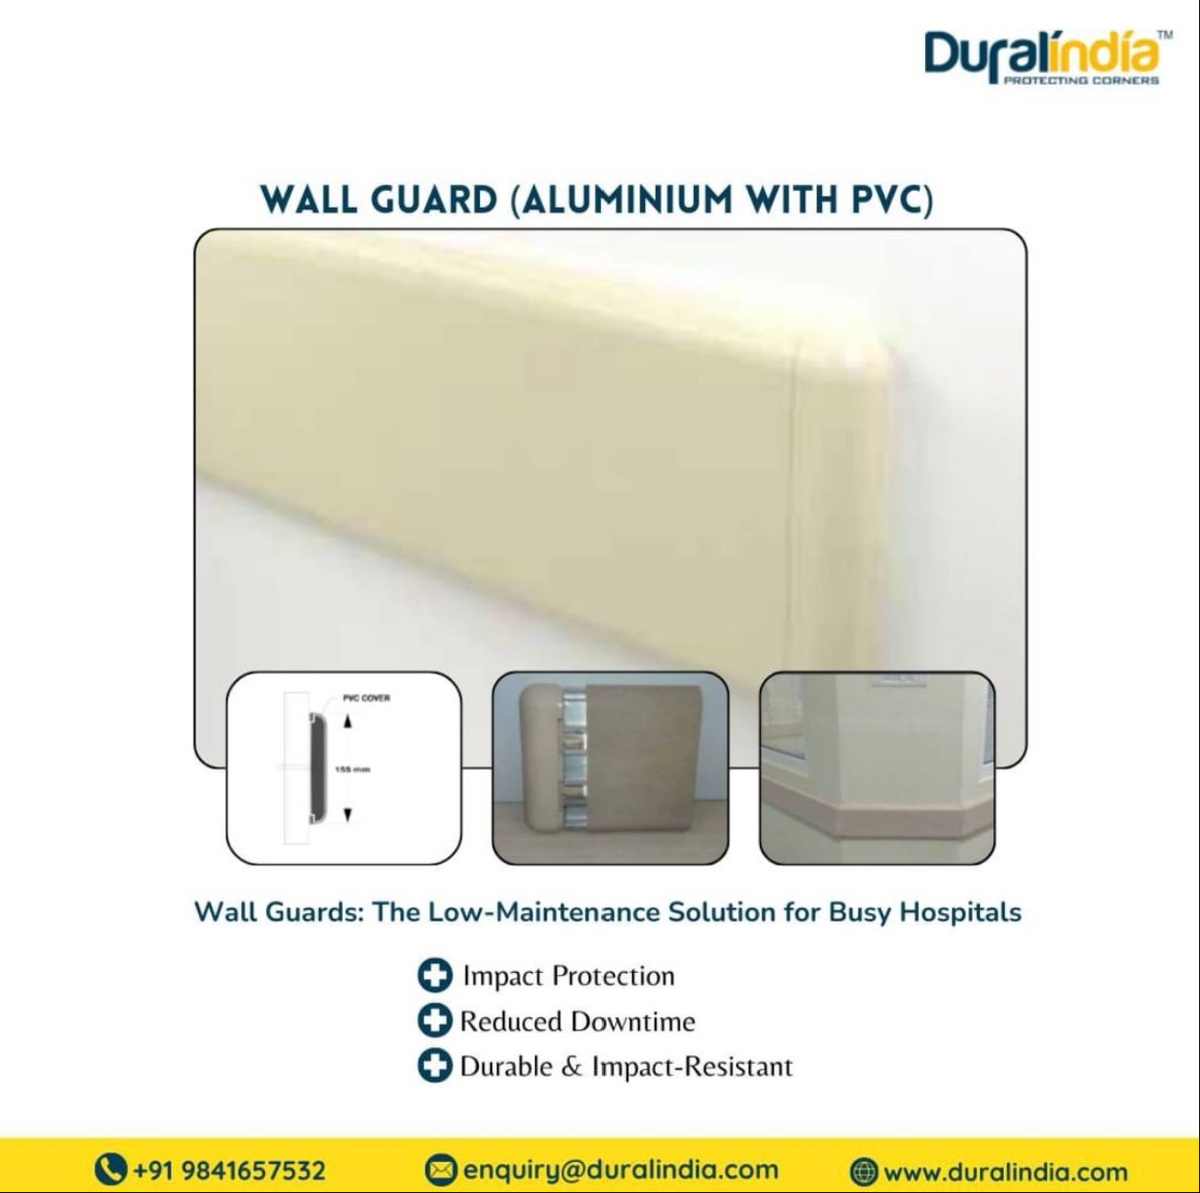 Streamline Hospital Efficiency: Wall Guards for Lasting Protection